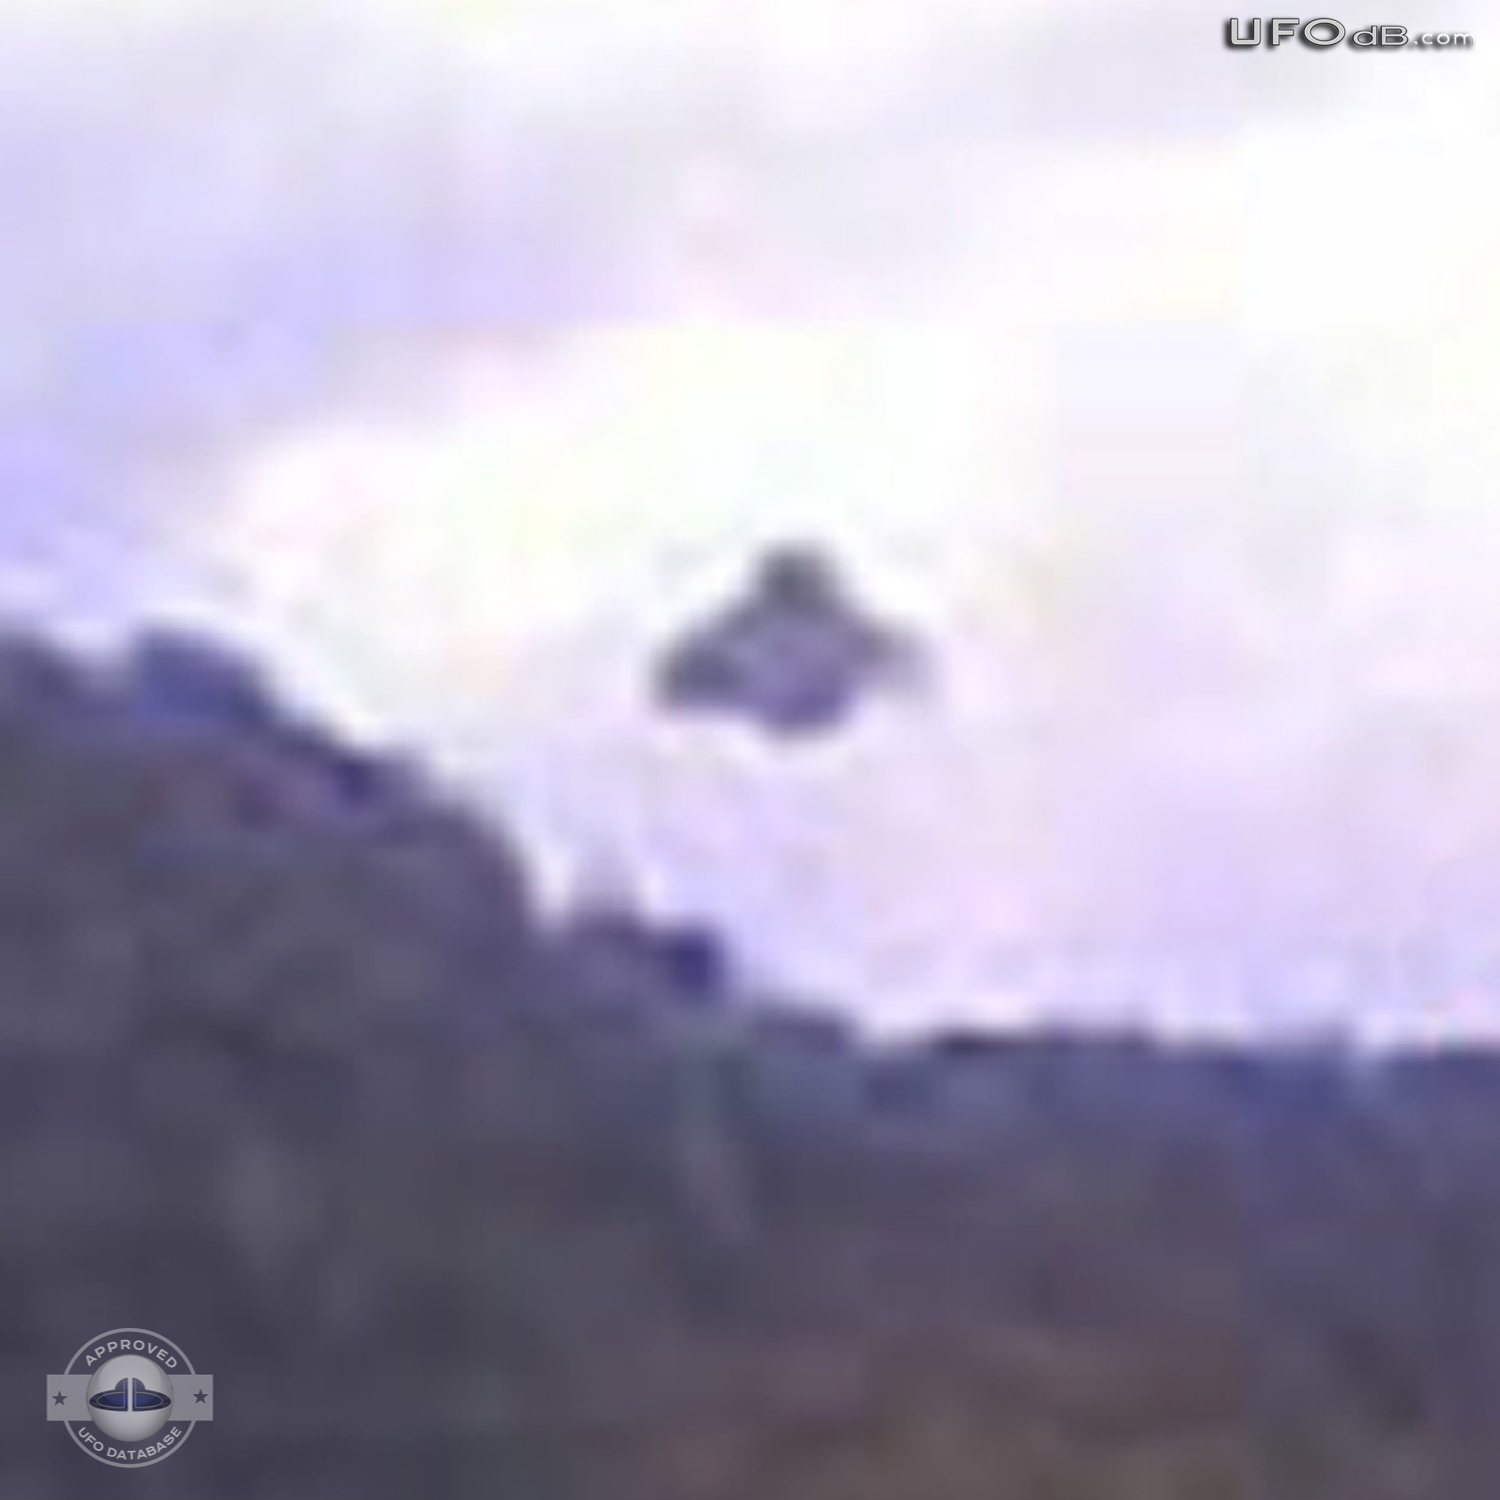 Australian Gold prospector capture UFO on picture in New South Wales UFO Picture #354-4